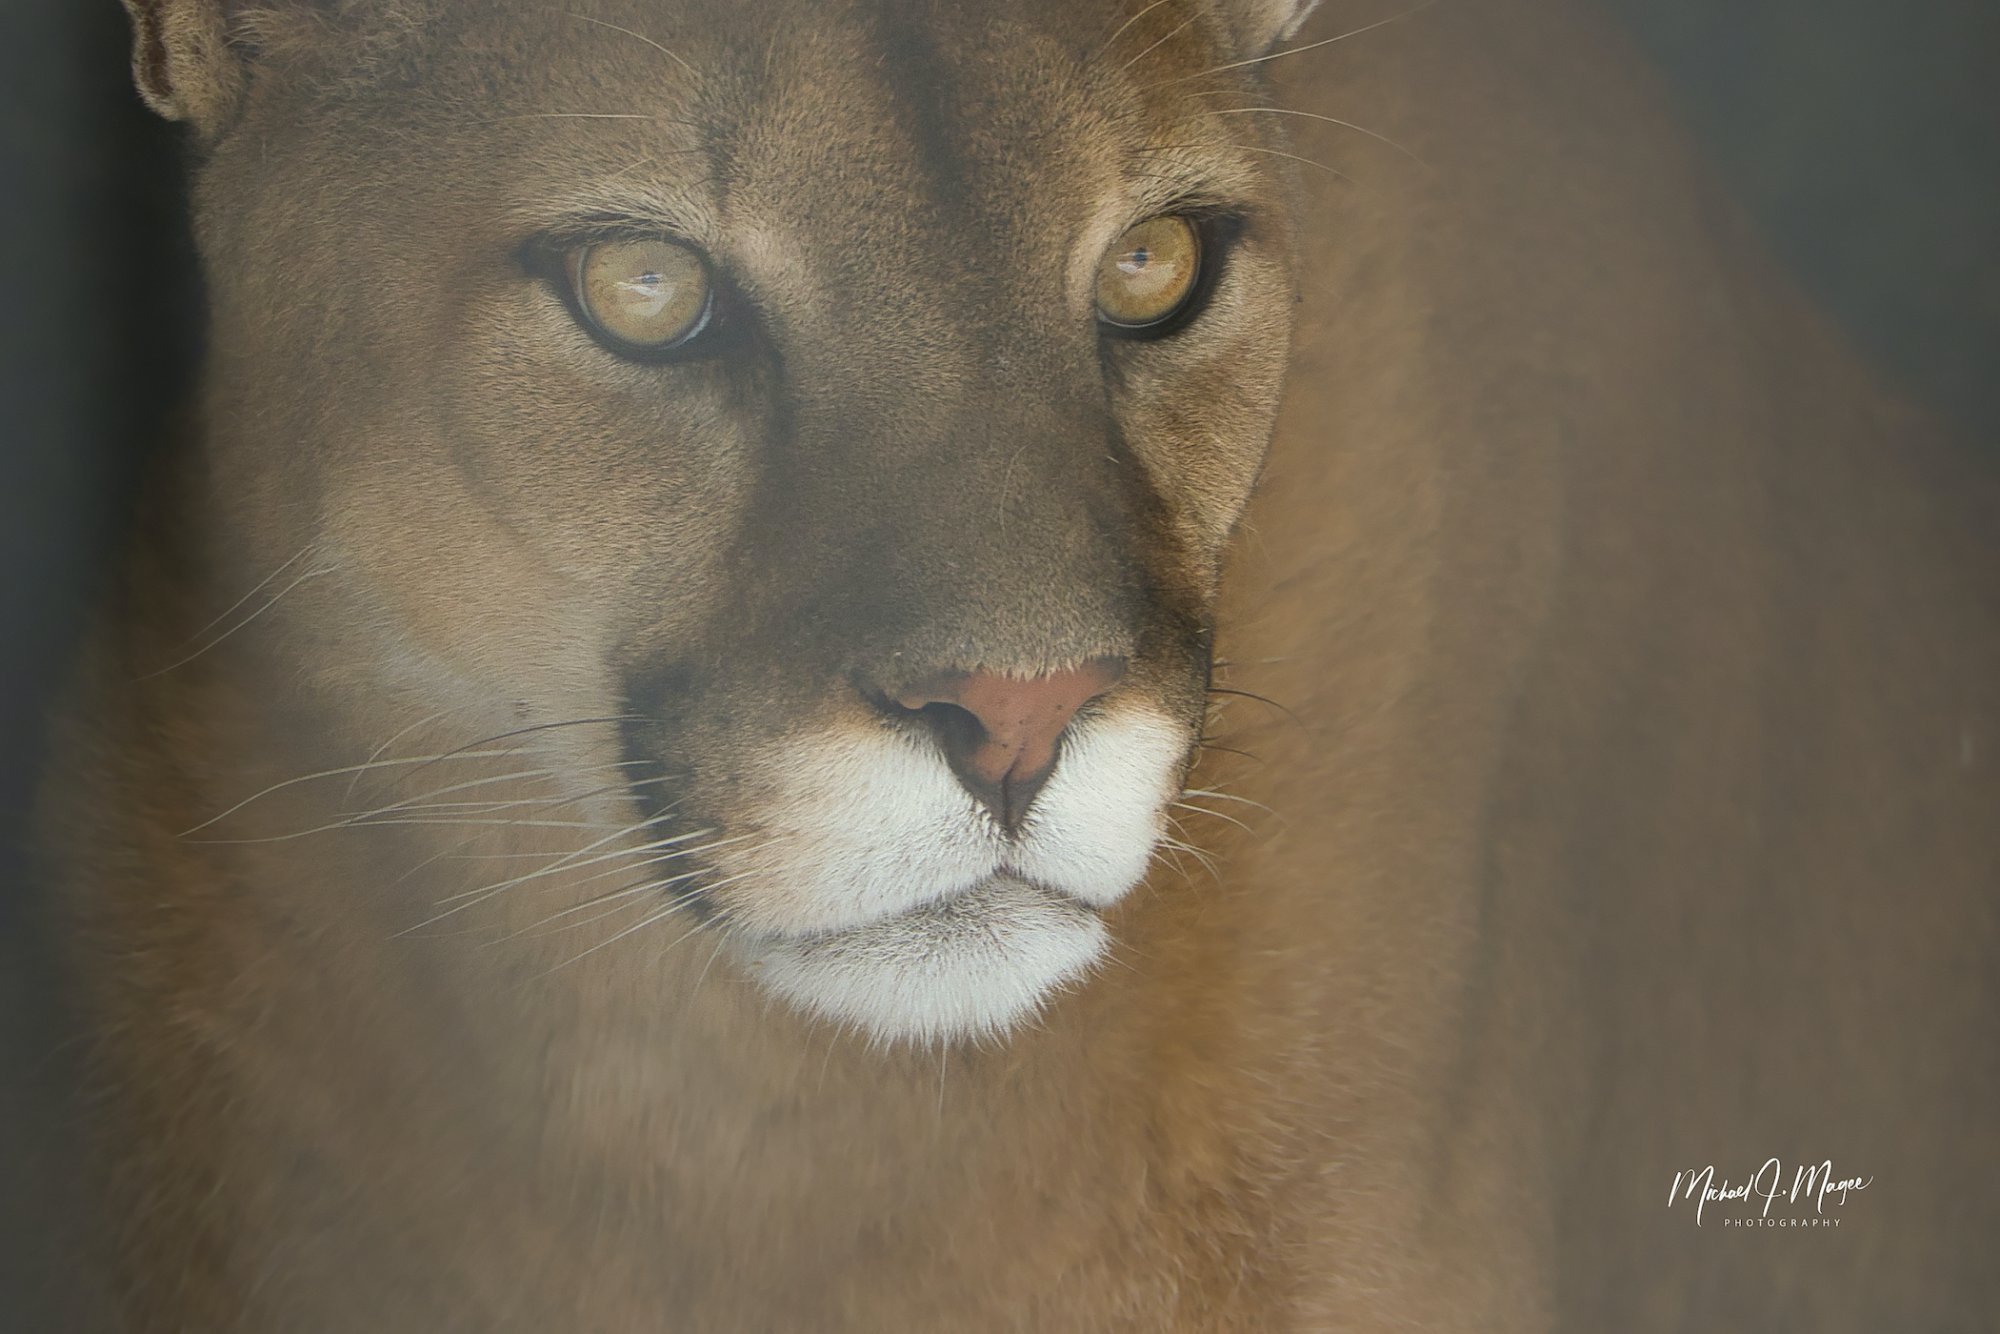 2020-09-06 A CLOSE UP HEAD SHOT OF A COUGAR WITH A BLURRED BACKGROUND WATERMARKED REDONE copy.jpeg